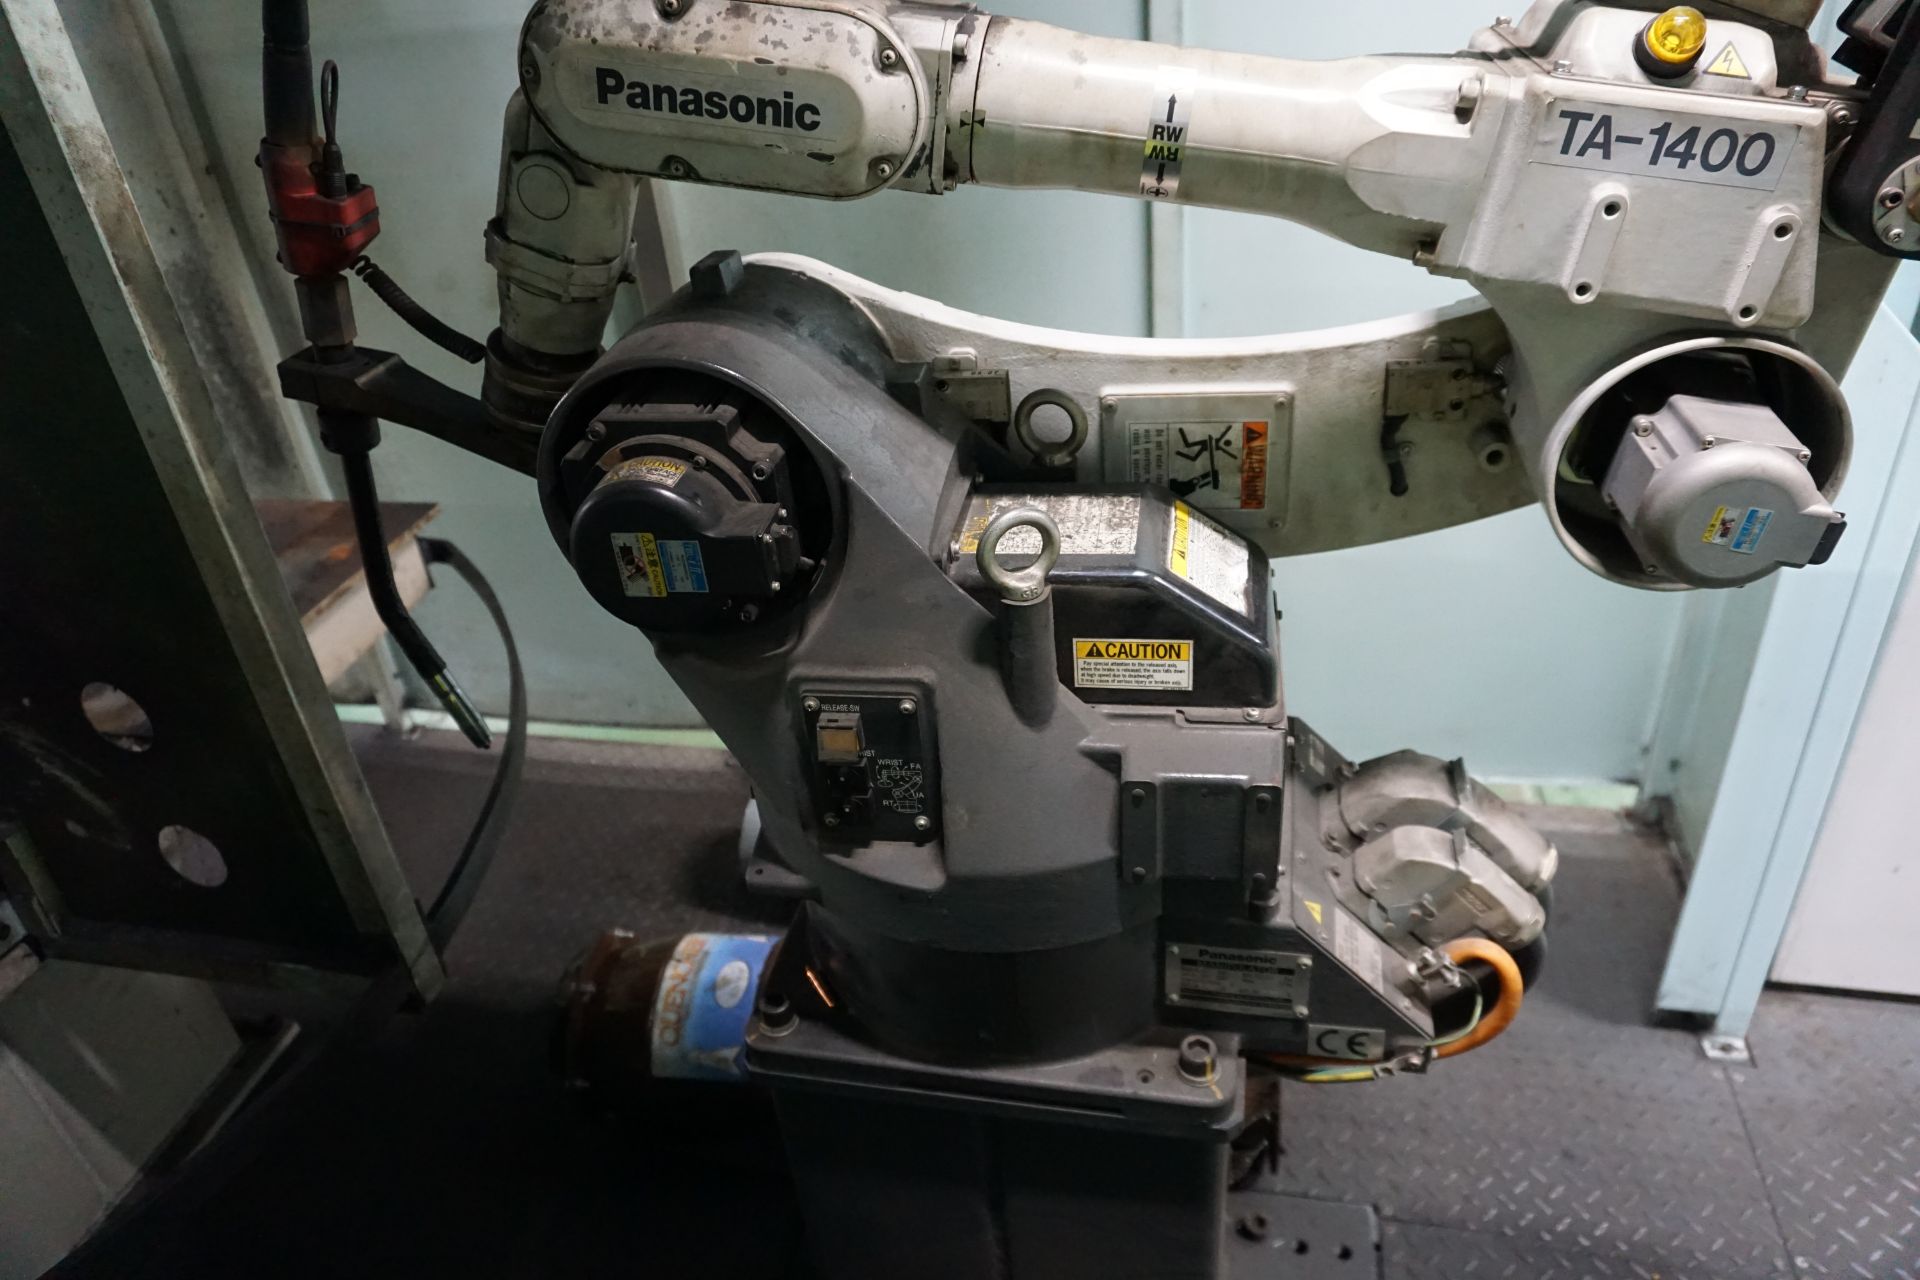 Box frame mounted MiG welding robot cell with a Panasonic TA-1400 6 axis MiG robot - Image 9 of 10